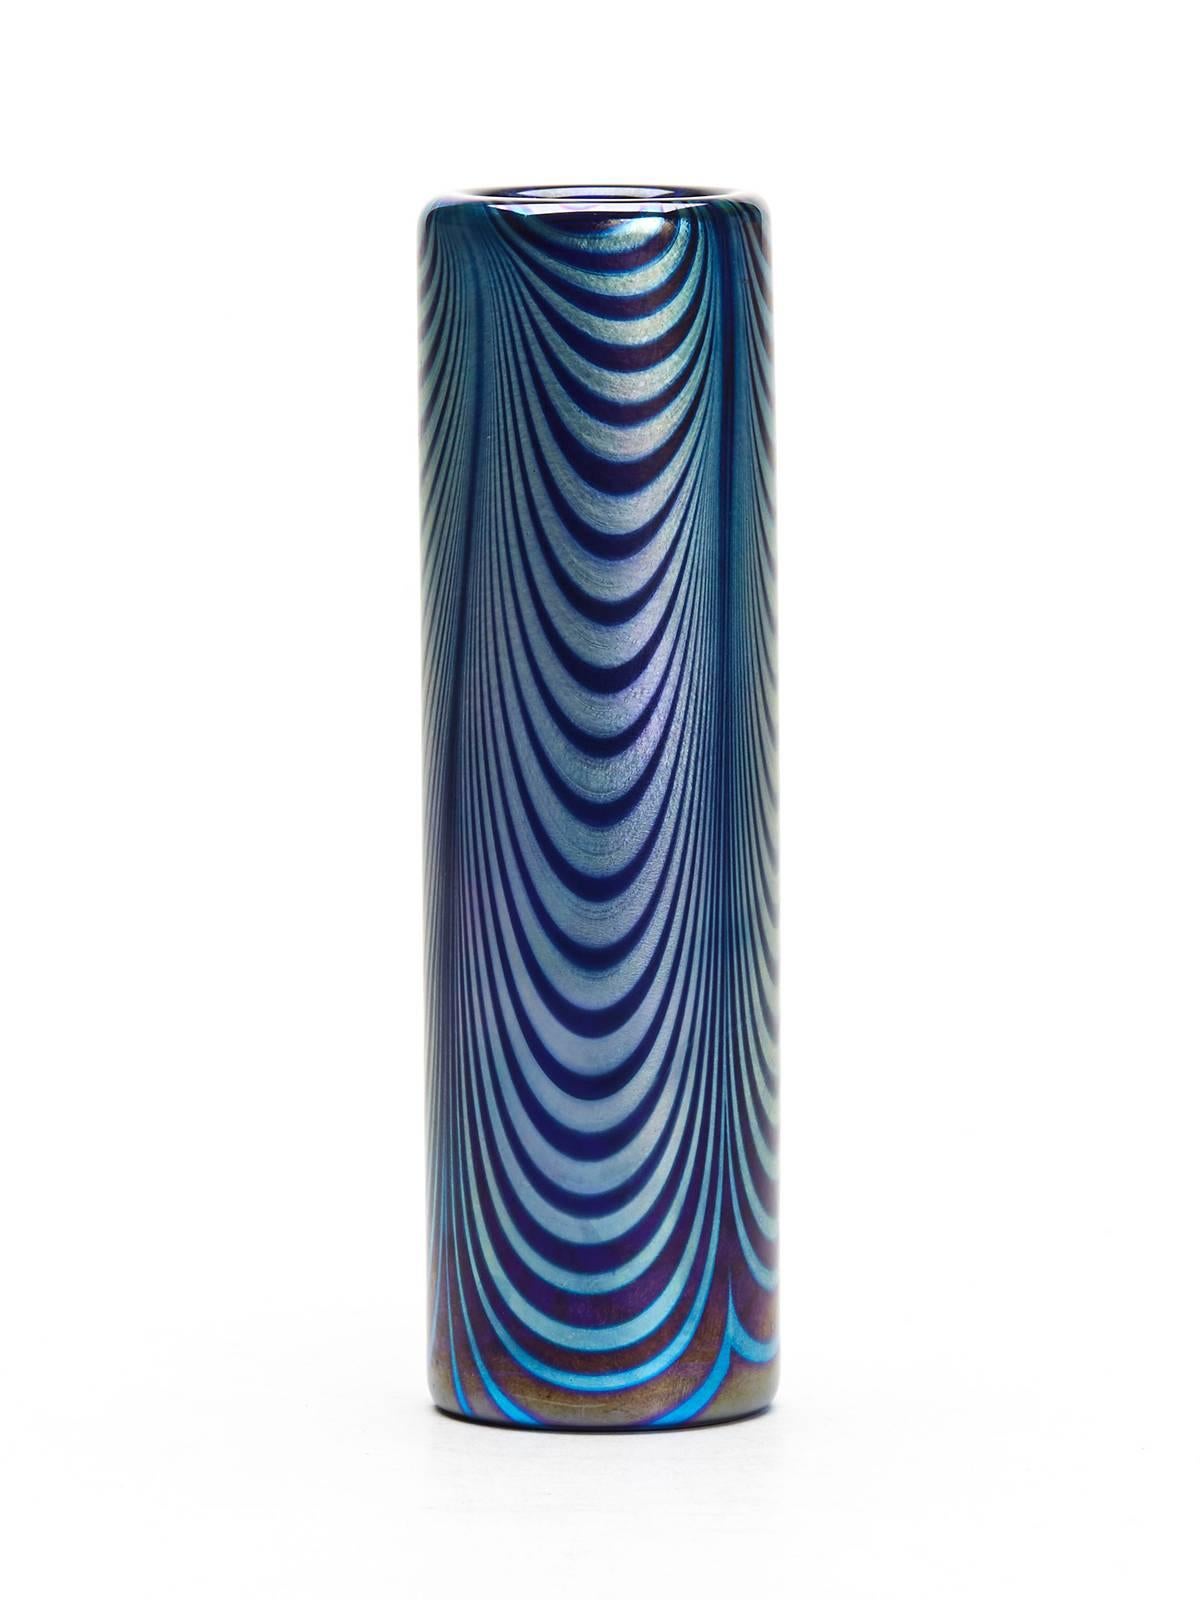 An absolutely stunning Art Nouveau Loetz Phanomen art glass vase with a wonderful iridescent peacock feather design on a blue glass ground. The elegant cylindrical vase is heavily made and has an appearance which would compliment any modern or